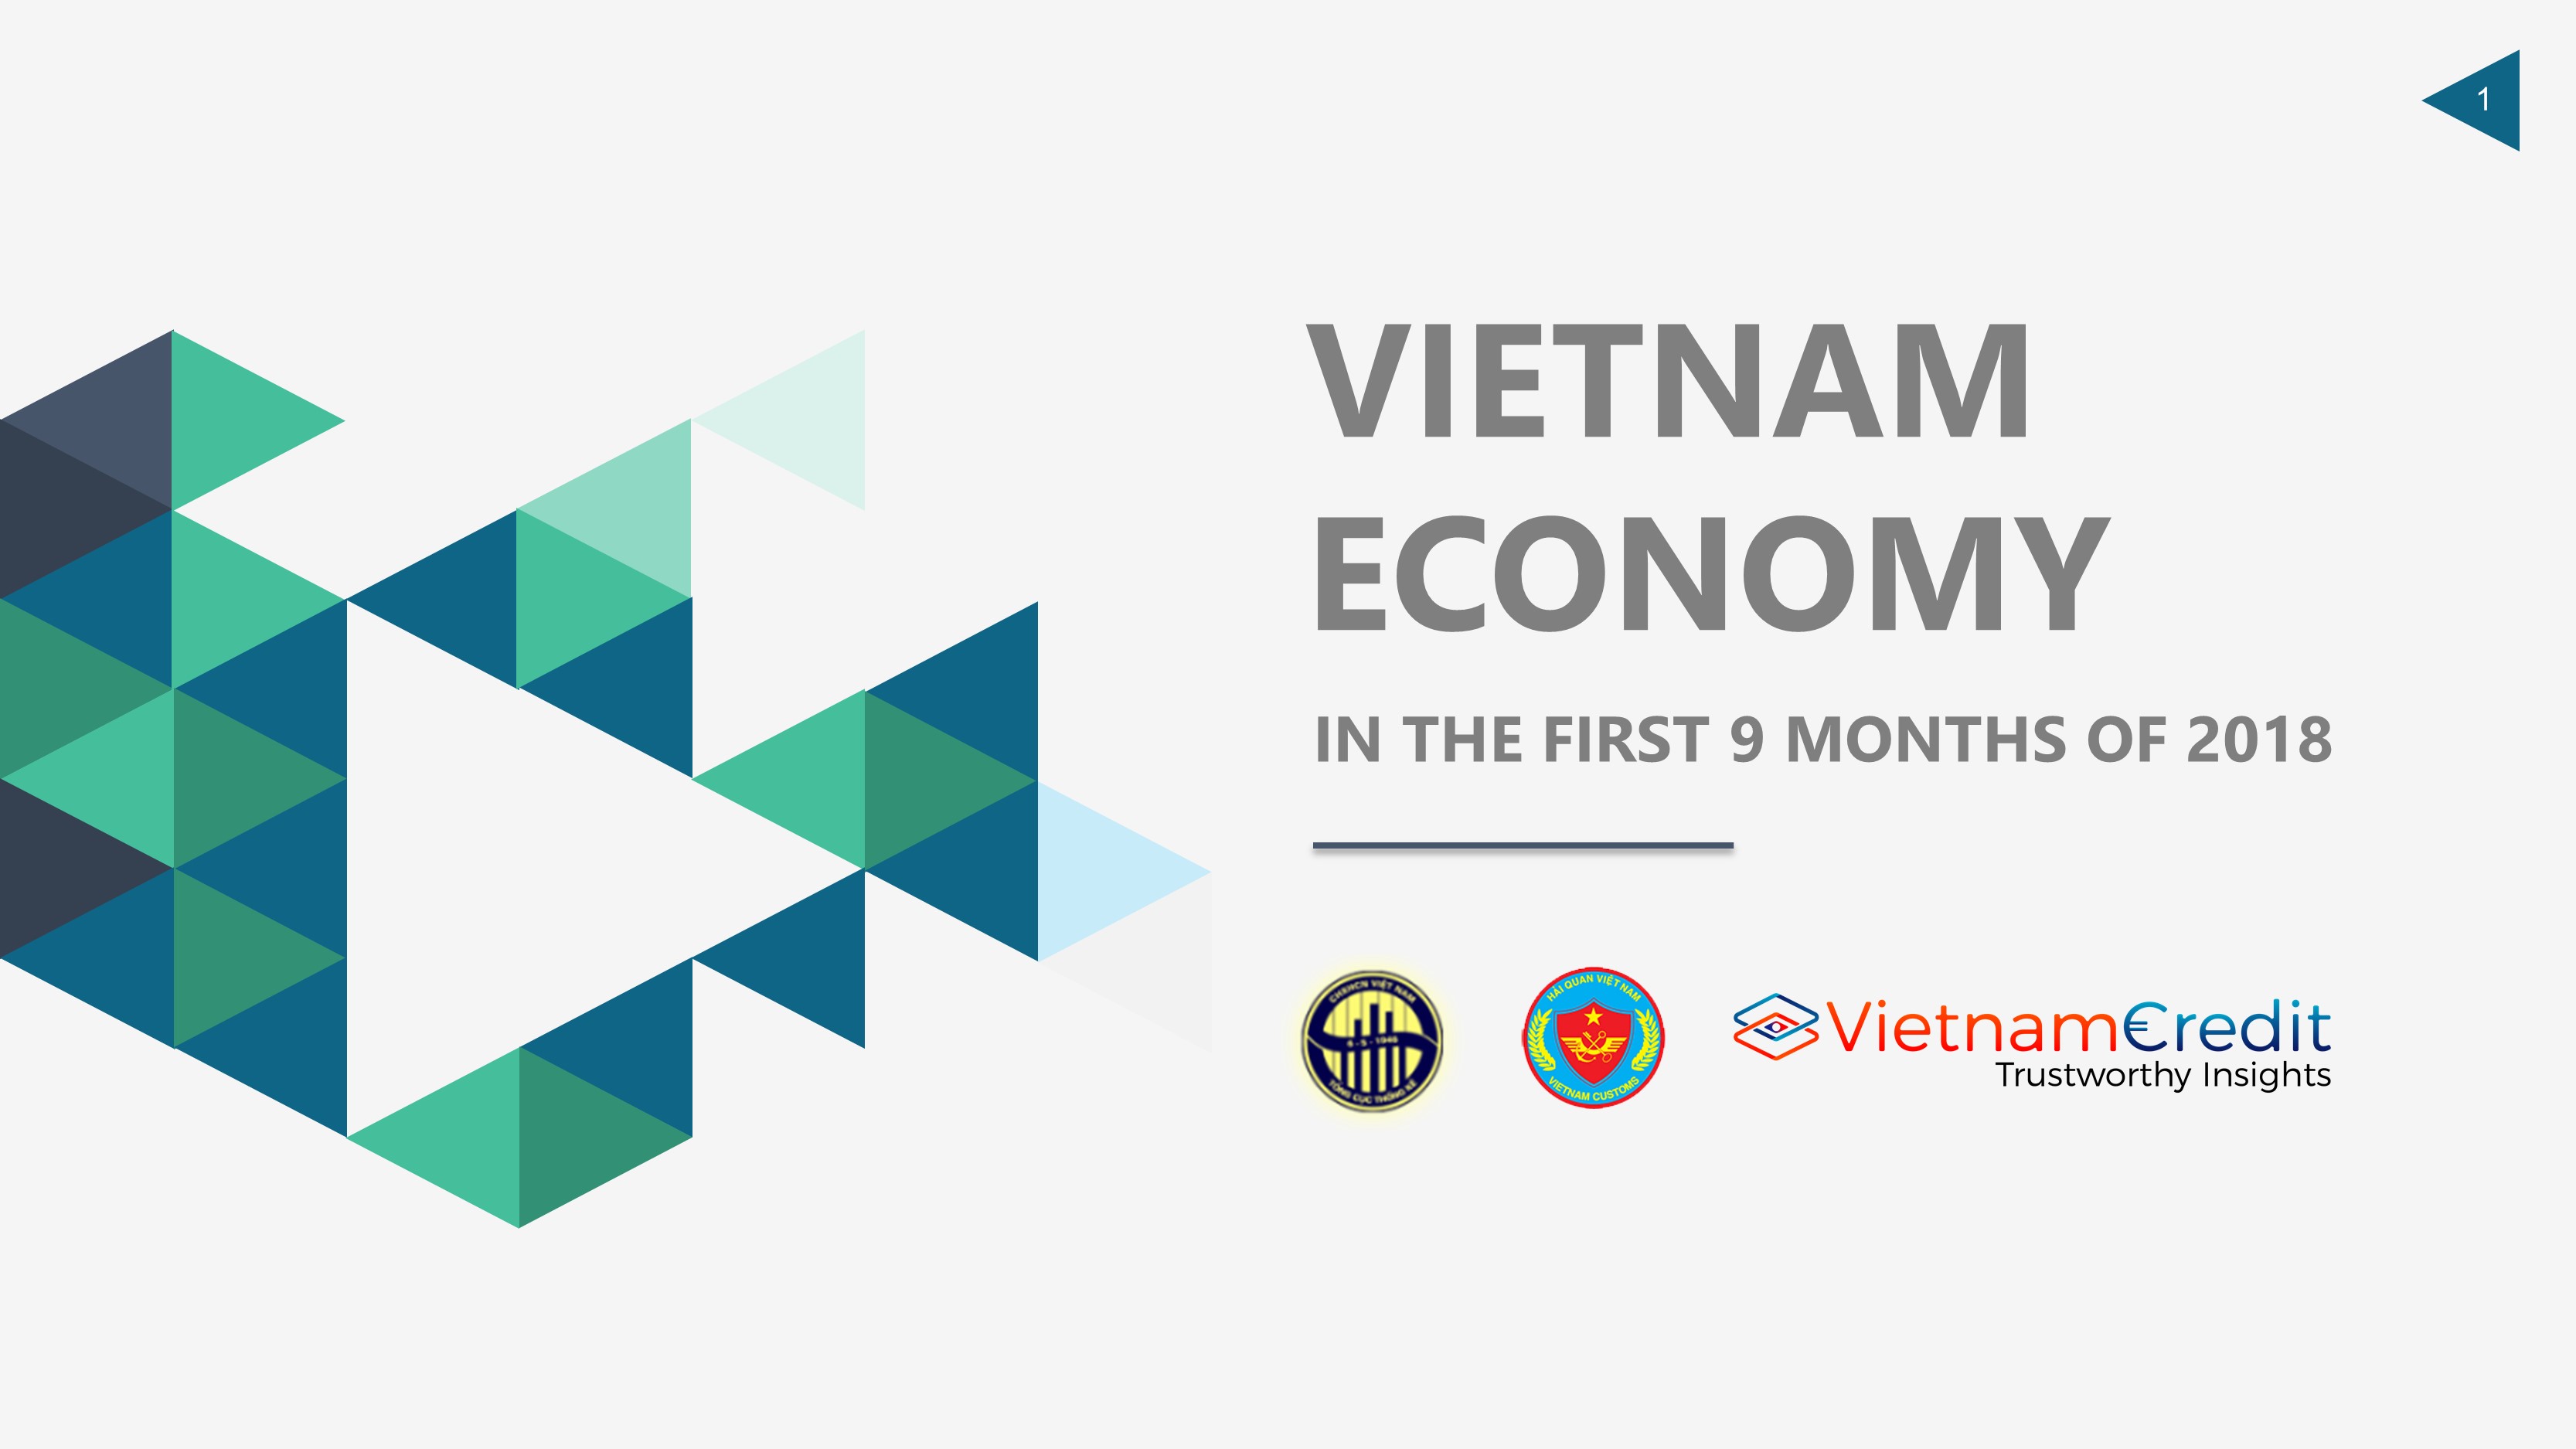 INFOGRAPHIC: VIETNAM ECONOMY IN THE FIRST 9 MONTHS OF 2018